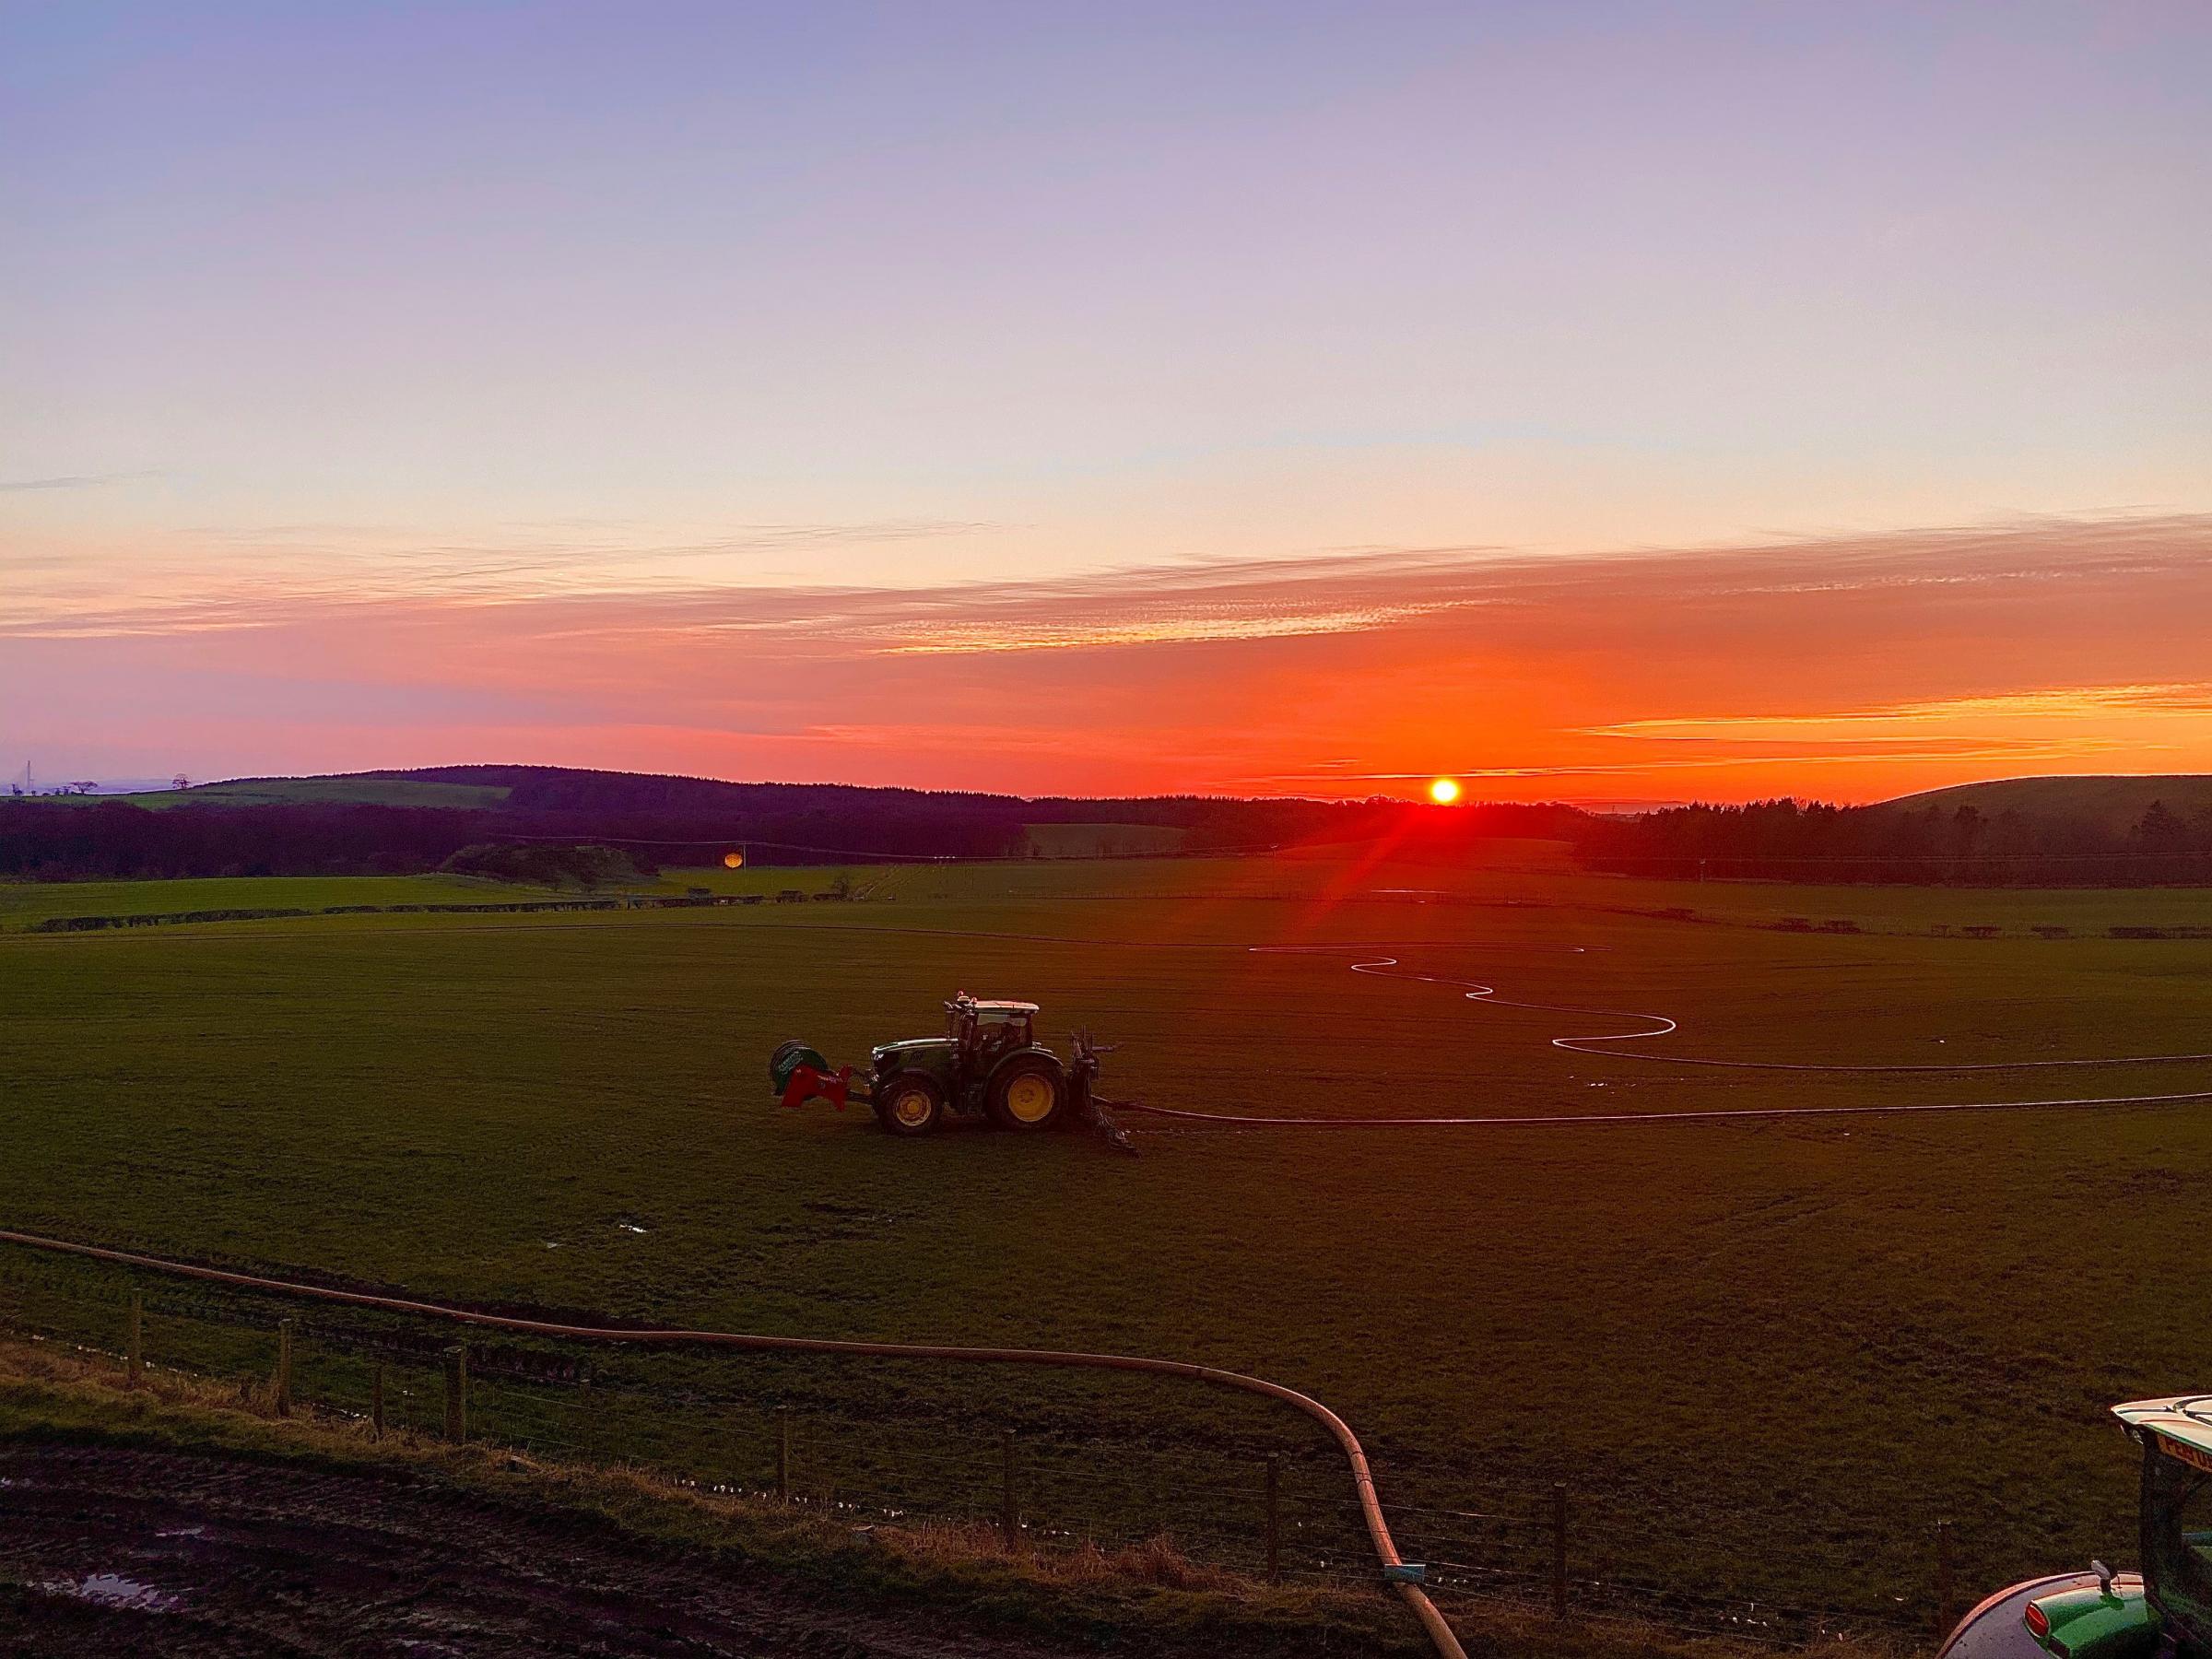 Umbilical slurry is the biggest part of the business, here at sunset hours dont matter come peak season of the business